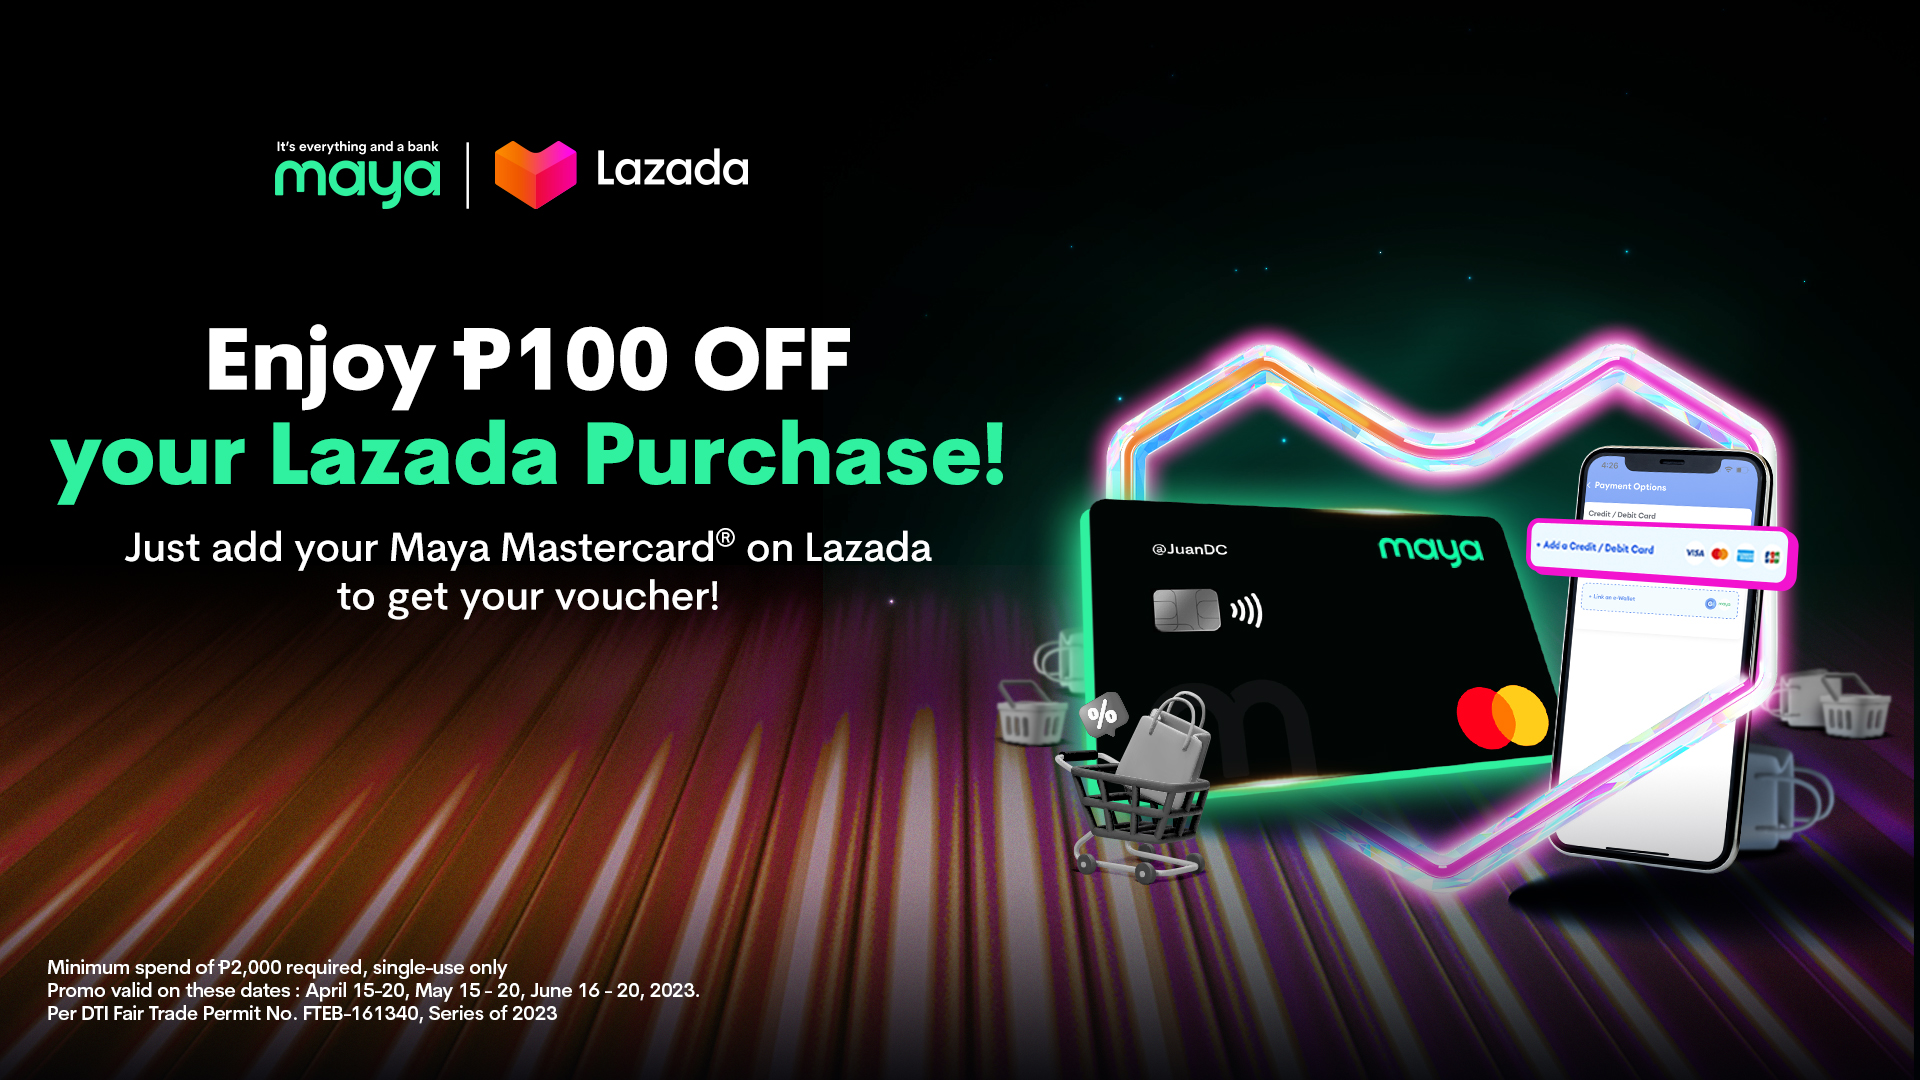 Get P100 OFF on Lazada when you save your Maya Mastercard®!